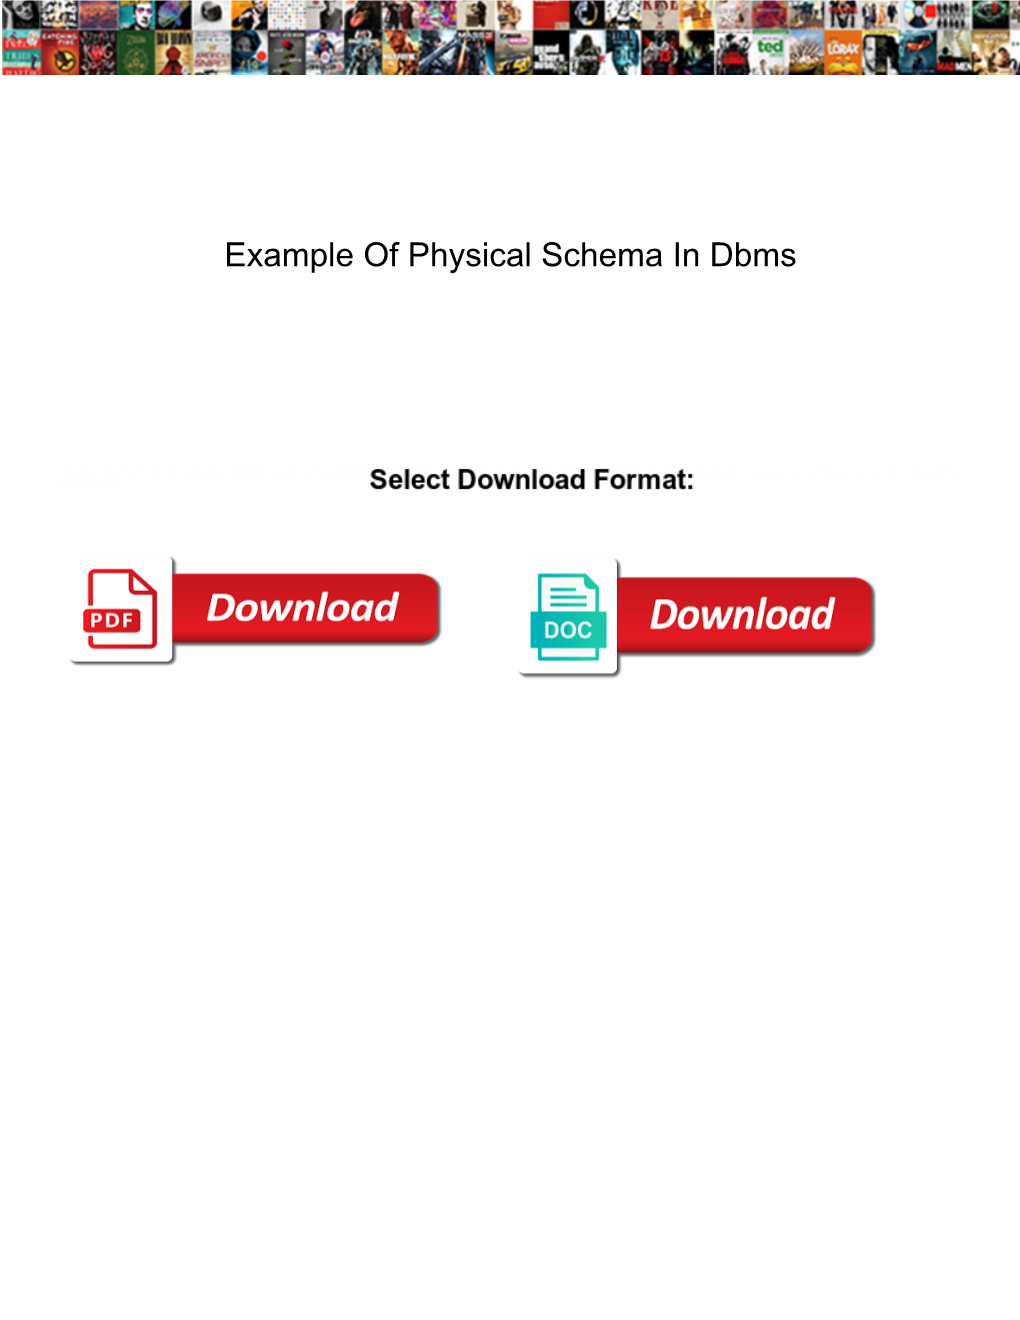 Example of Physical Schema in Dbms